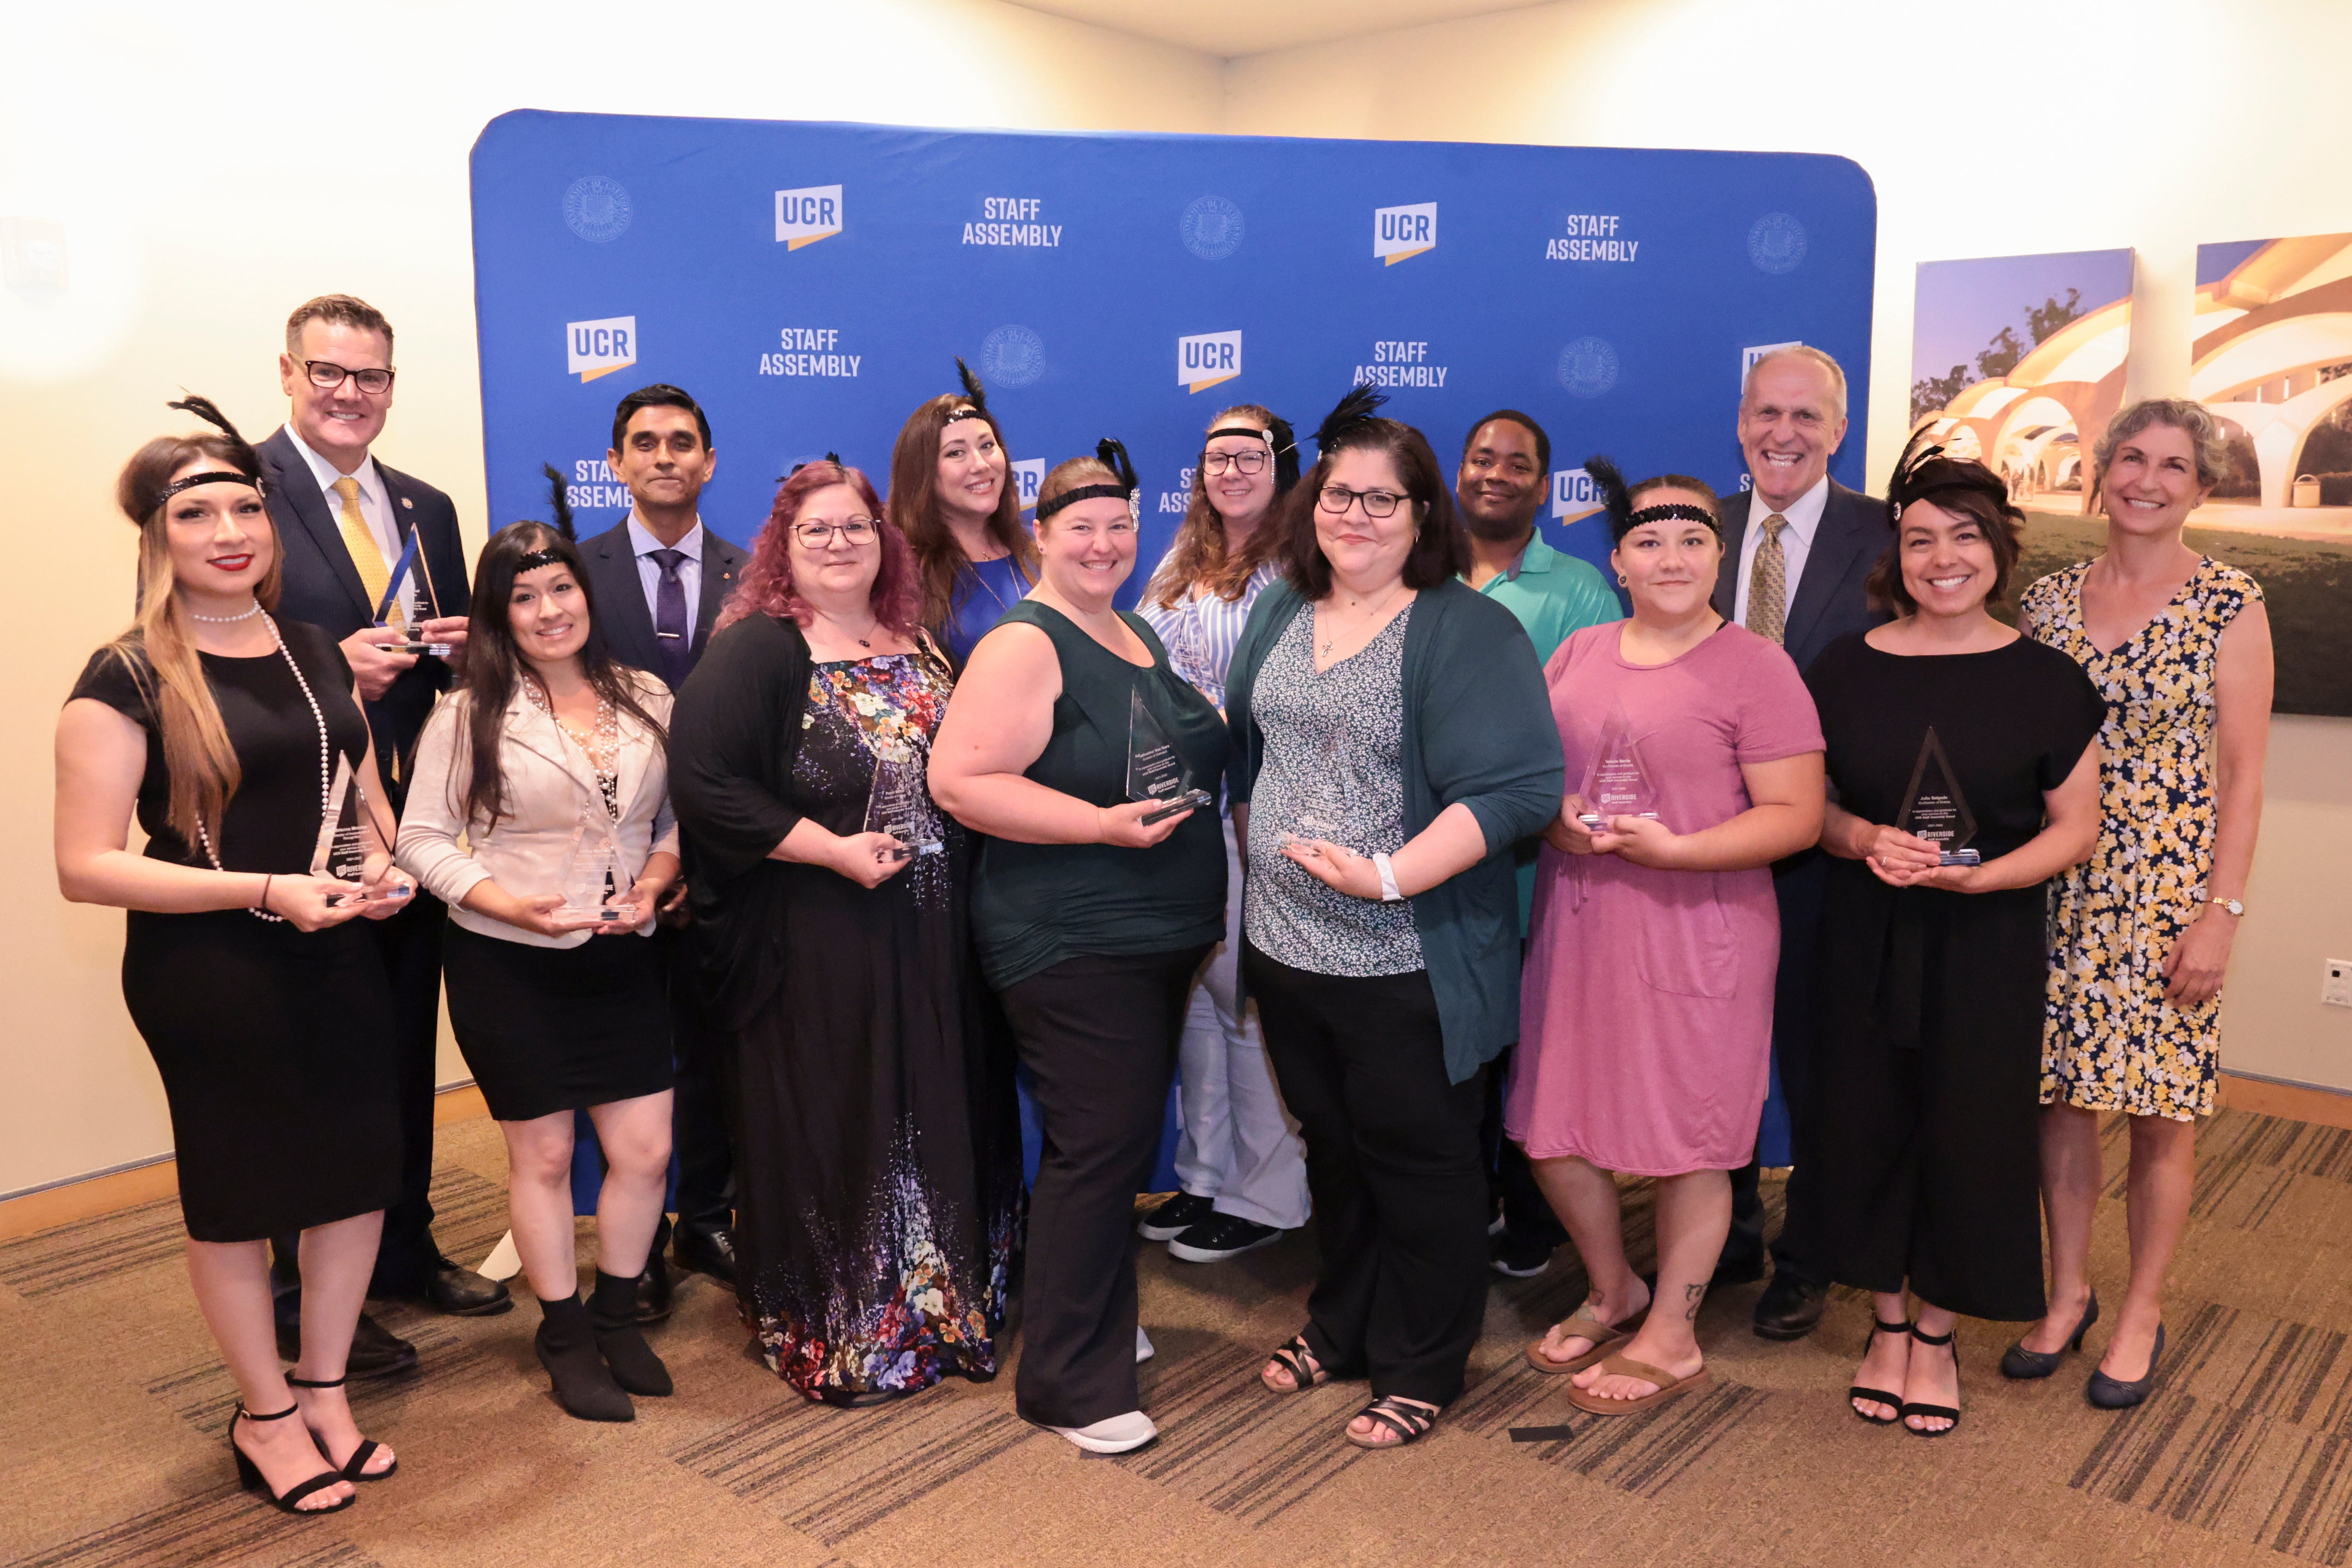 2021-2022 UCR Staff Assembly Executive Board members with Chancellor Wilcox and Provost Watkins at the 2022 Outstanding Staff Awards